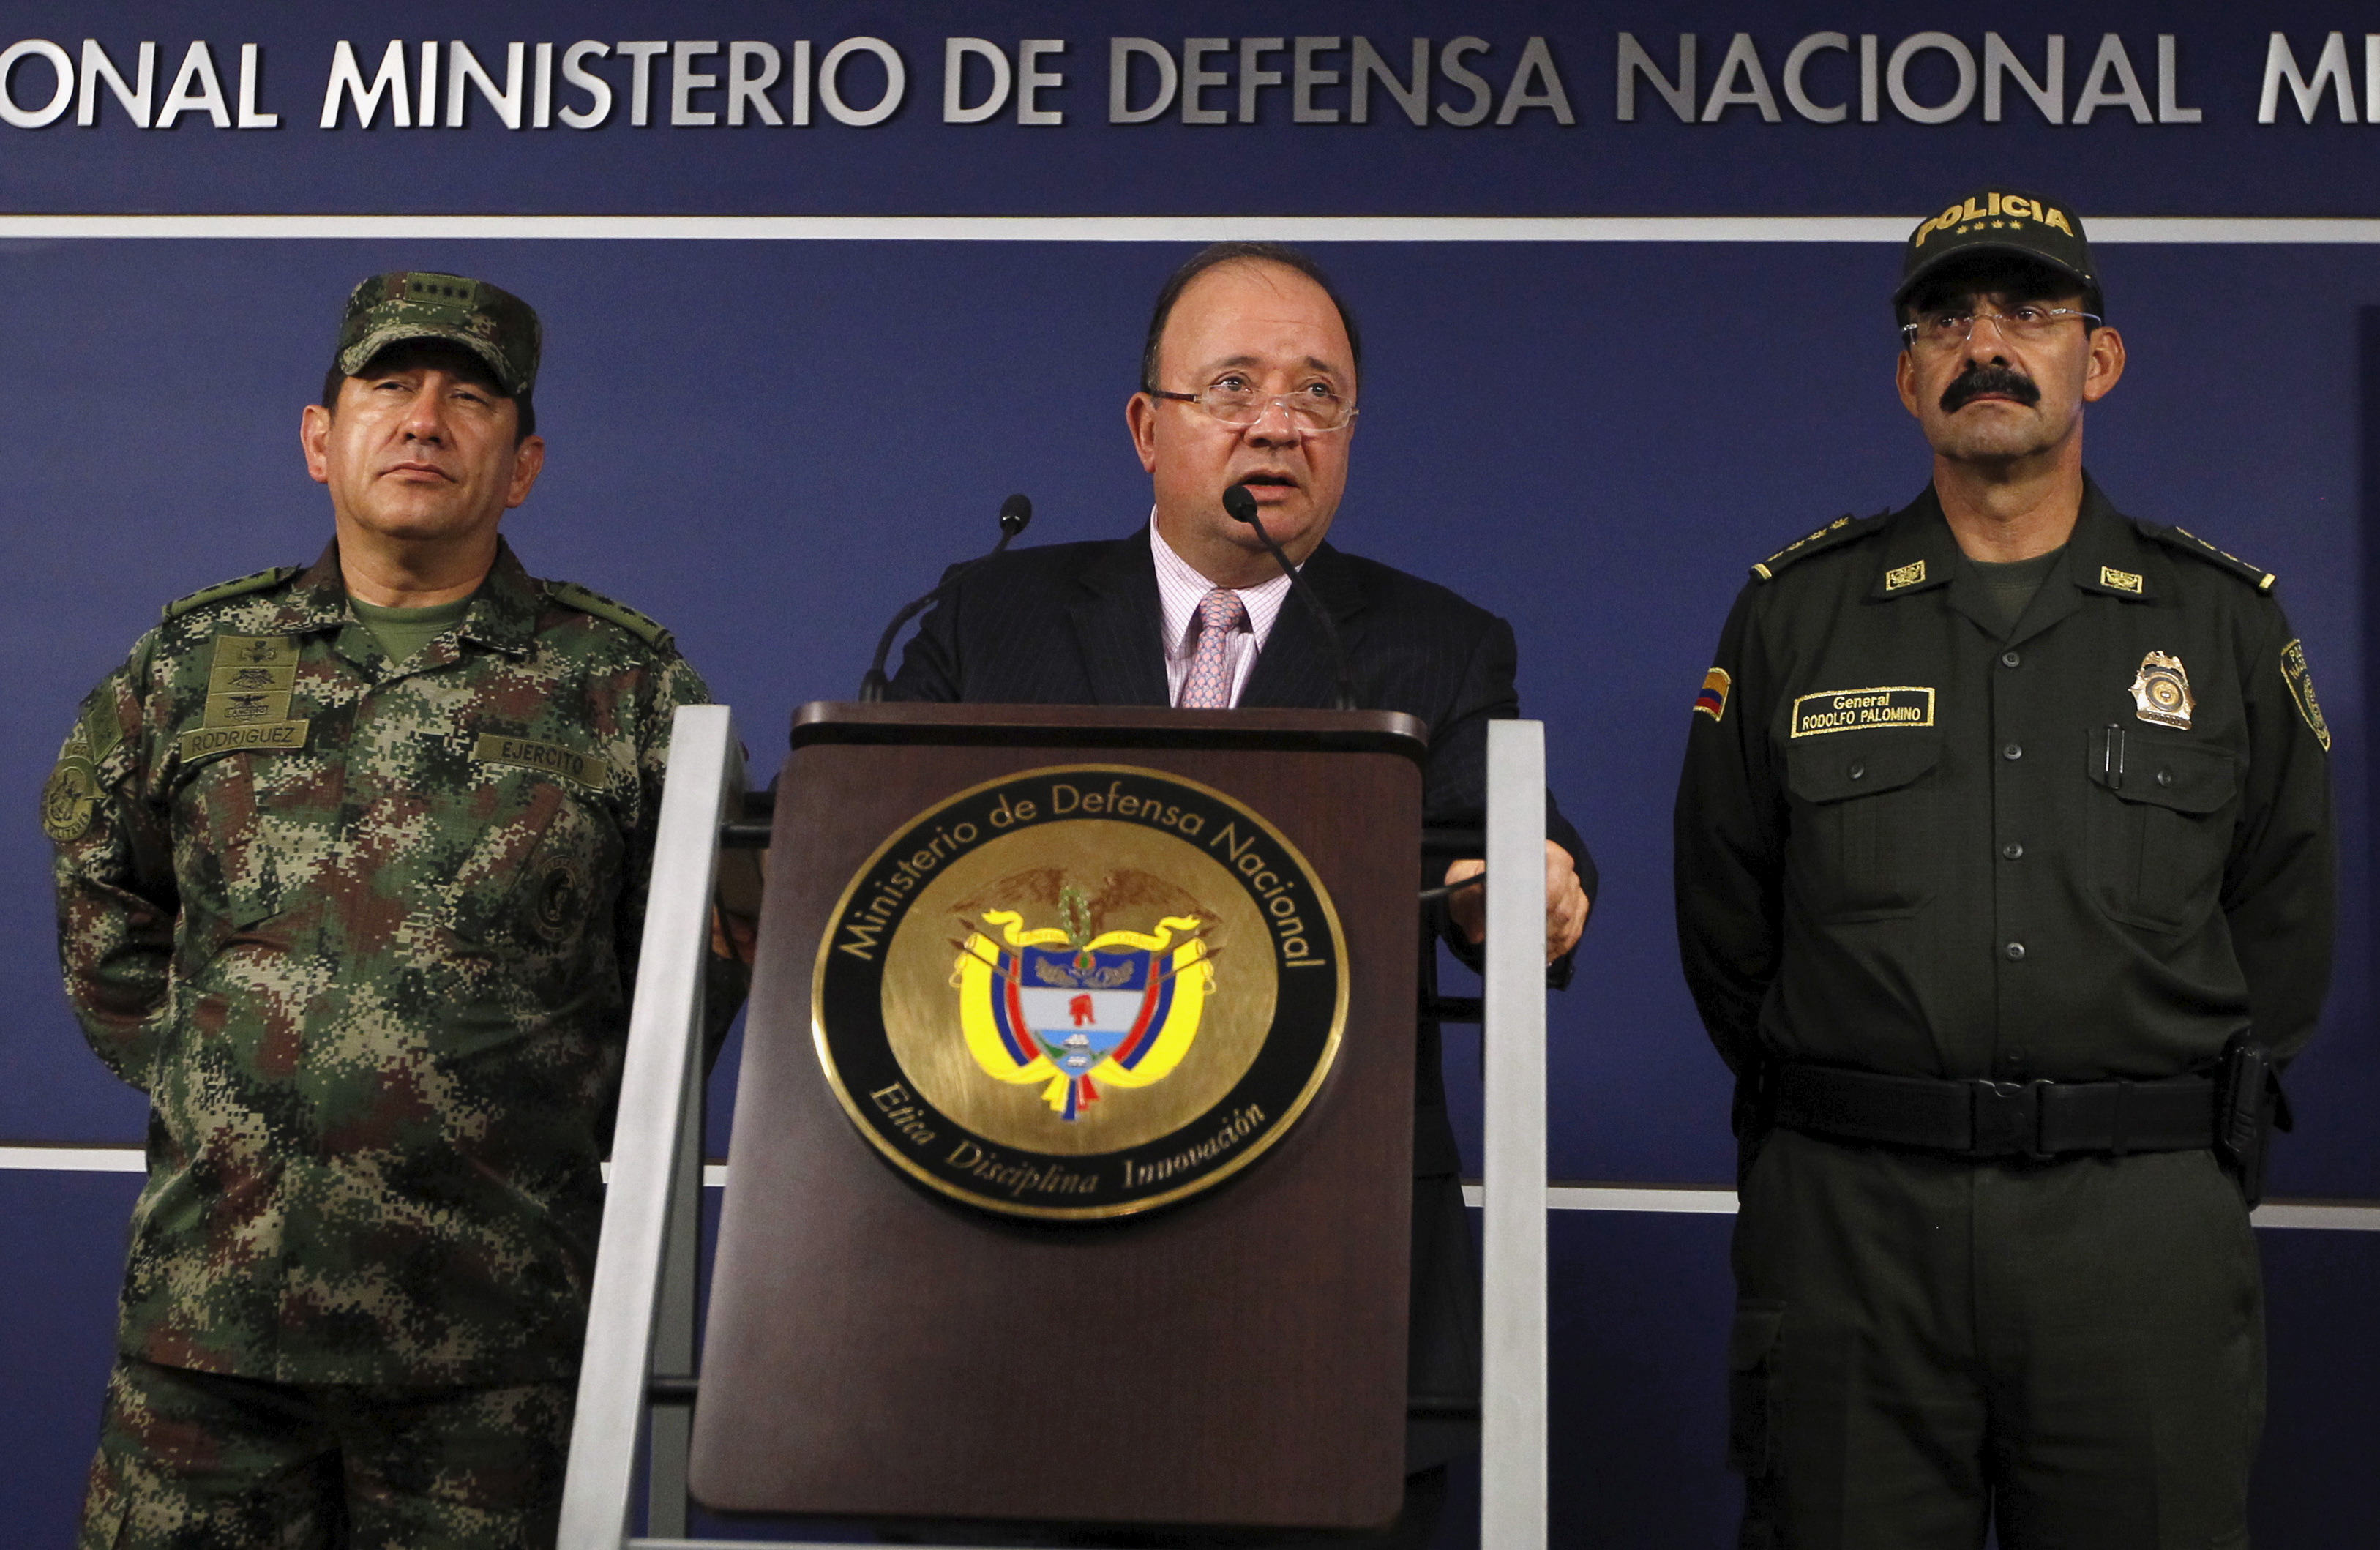 Colombia's Defense Minister Luis Carlos Villegas, center, speaks at a news conference in Bogota, Colombia Oct. 26, 2015 (John Vizcaino—Reuters)